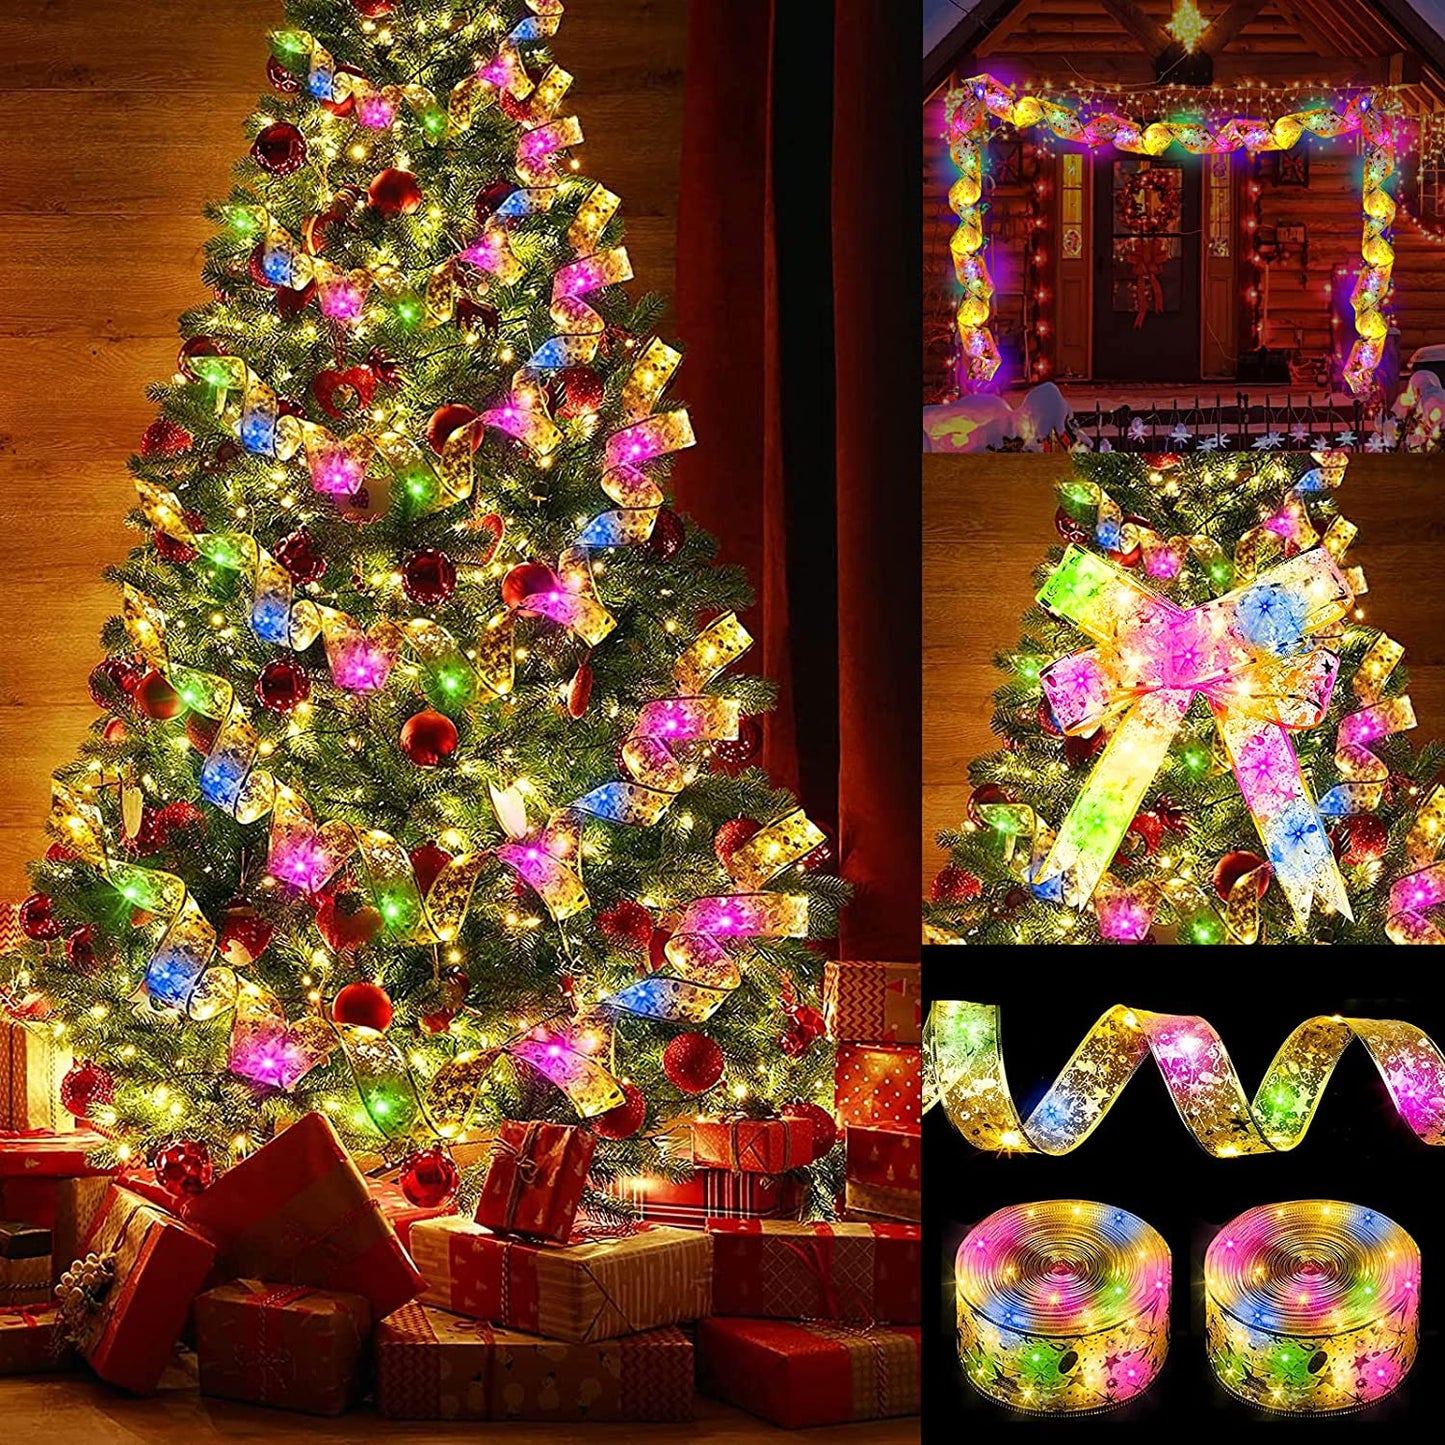 Christmas Ribbon Lights 13.2Ft 40 LED Lights Battery Powered Copper Wire Ribbon Bows String Lights for New Year Party Weddings Christmas Tree Decorations